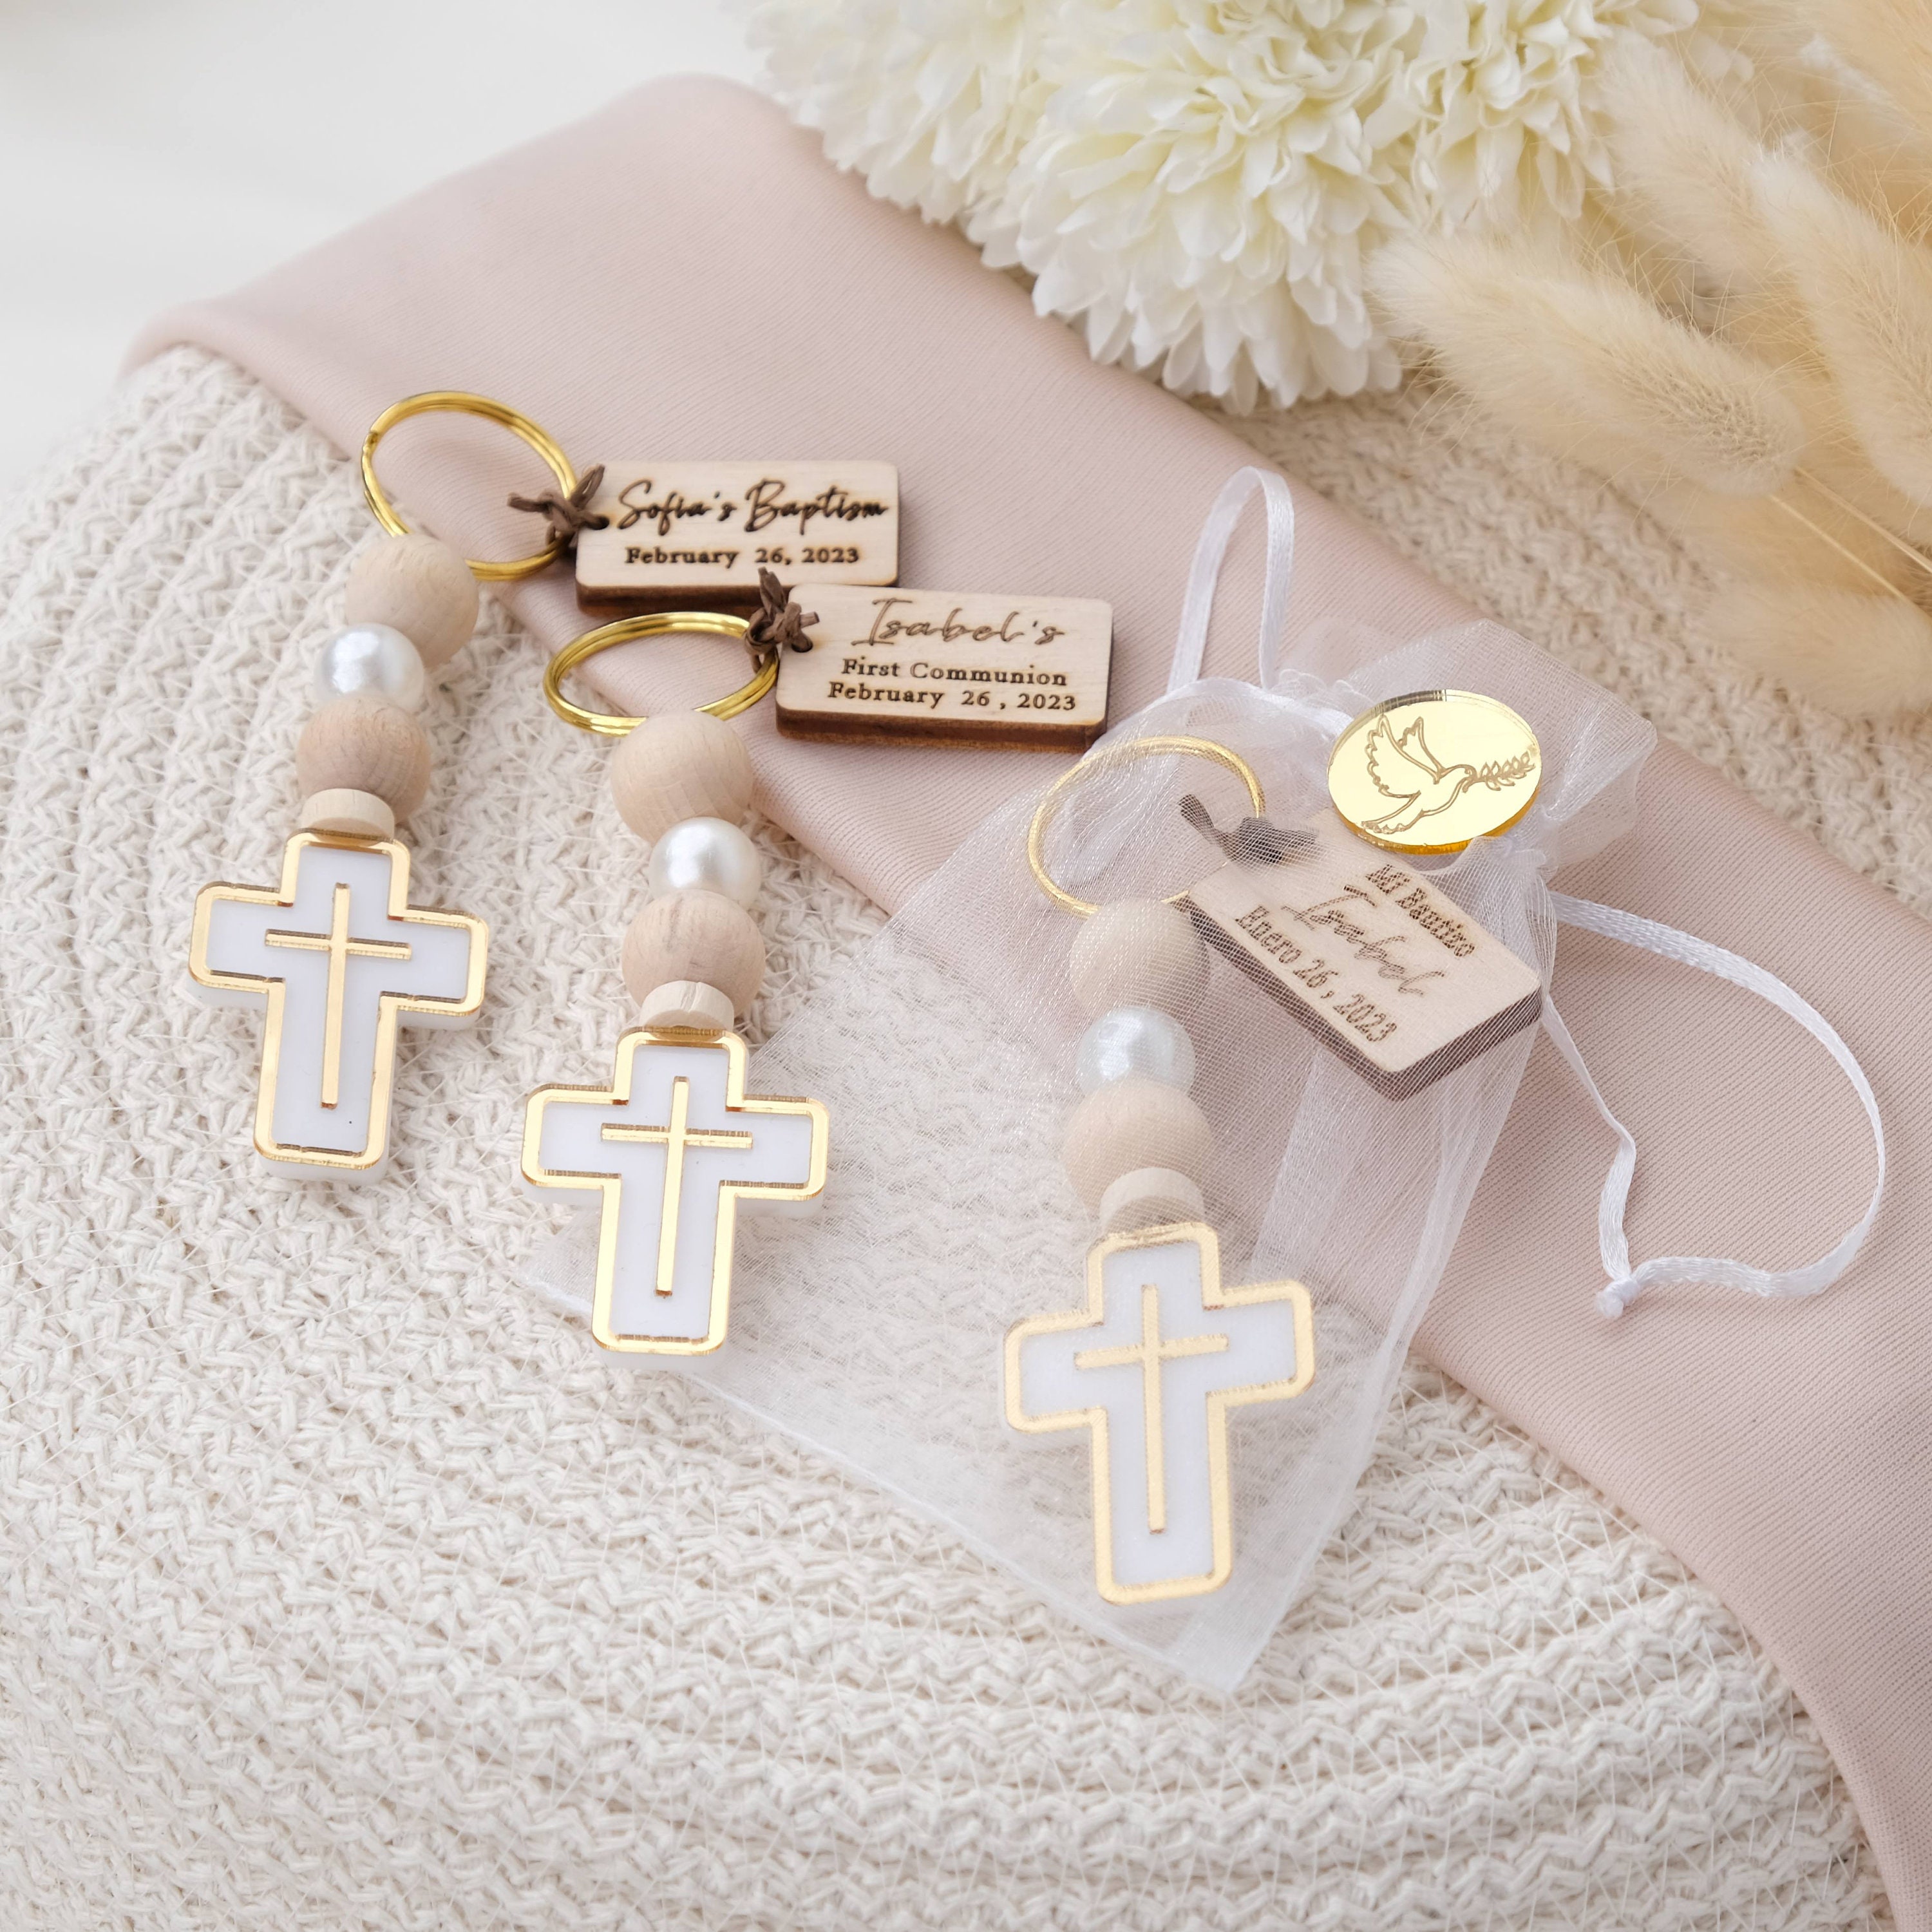 50 Pack Mini Wooden Cross Keychains for Christian Party Favors